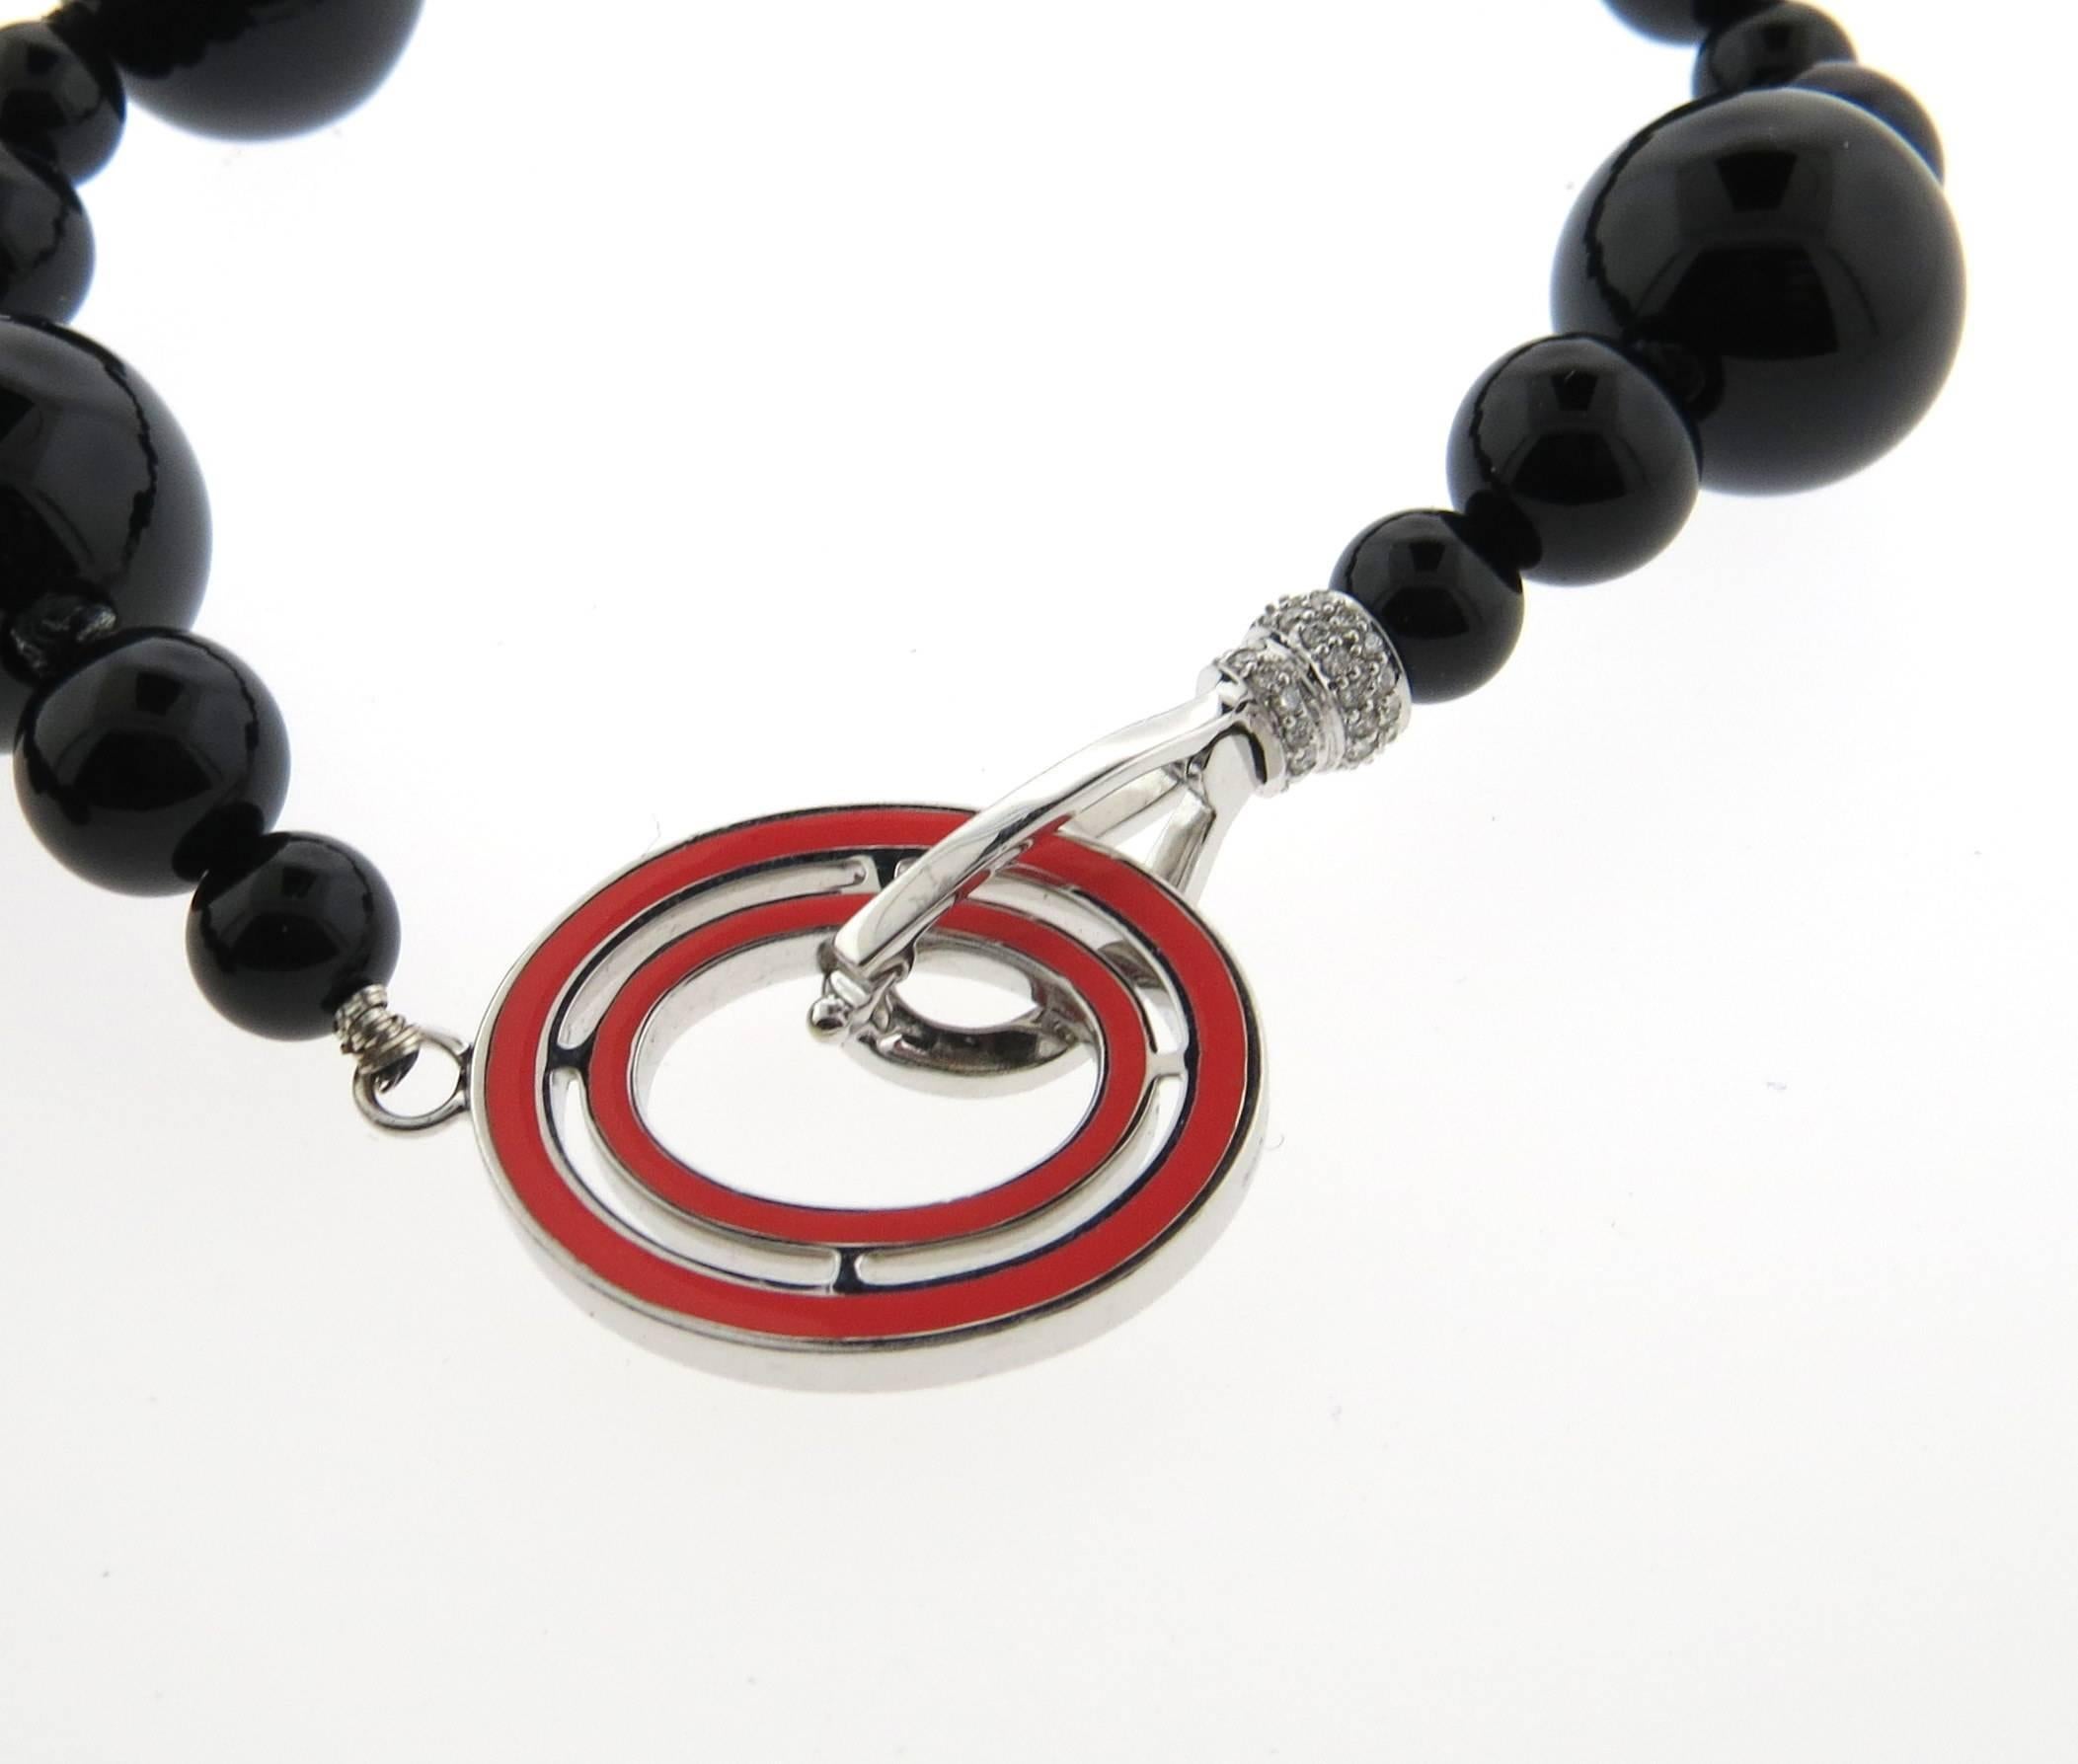 New 18k white gold long necklace, crafted by Ivanka Trump, featuring 6.4mm to 14.3mm onyx beads and approx. 0.87ctw in G/VS diamonds.  Necklace is  38 1/2" long, clasp measures 38mm x 20mm. Marked: Ivanka Trump,750, N10459. Weight - 136.7